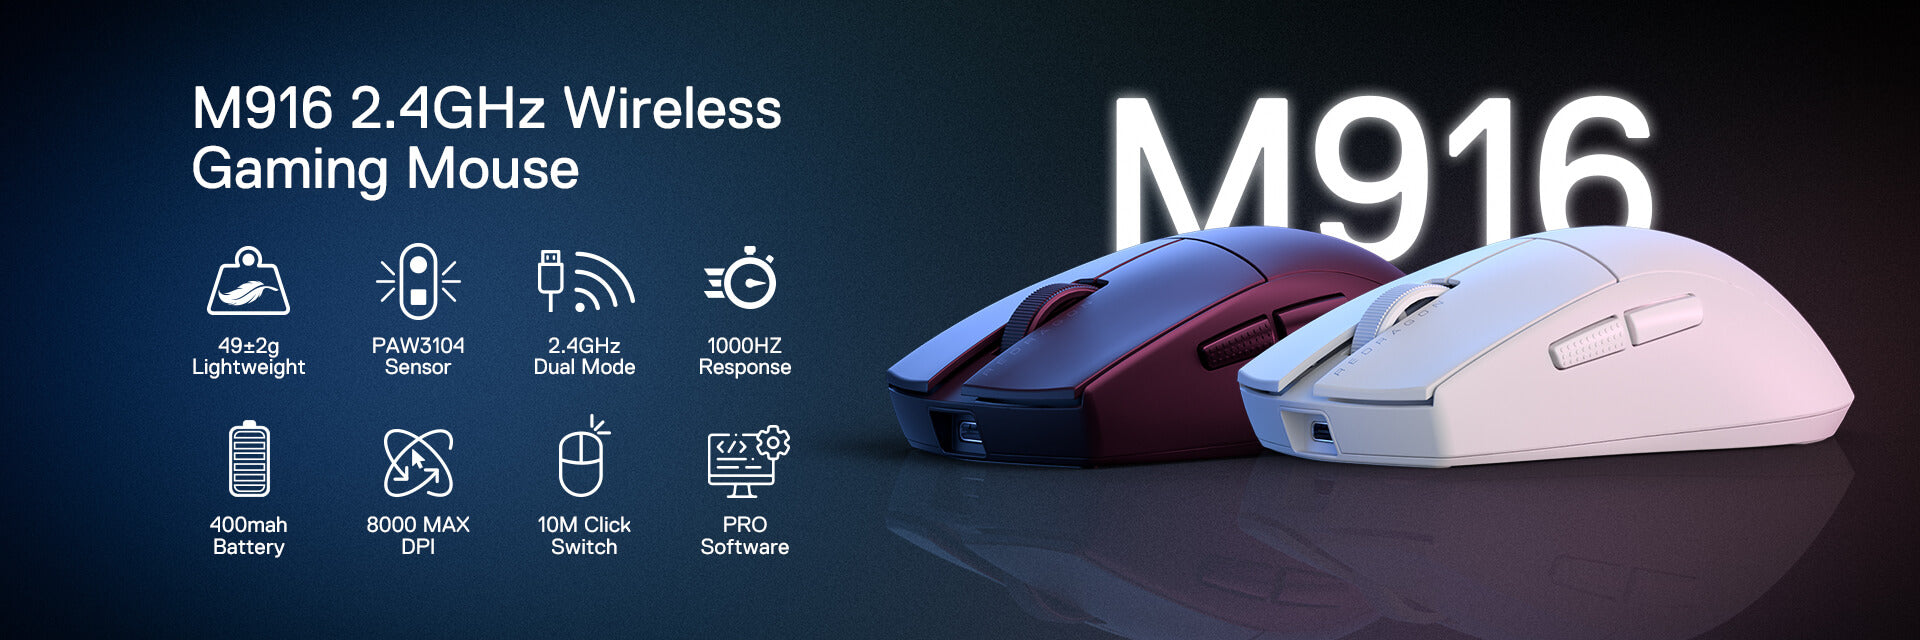 Redragon_M916_Wireless_Gaming_Mouse_7